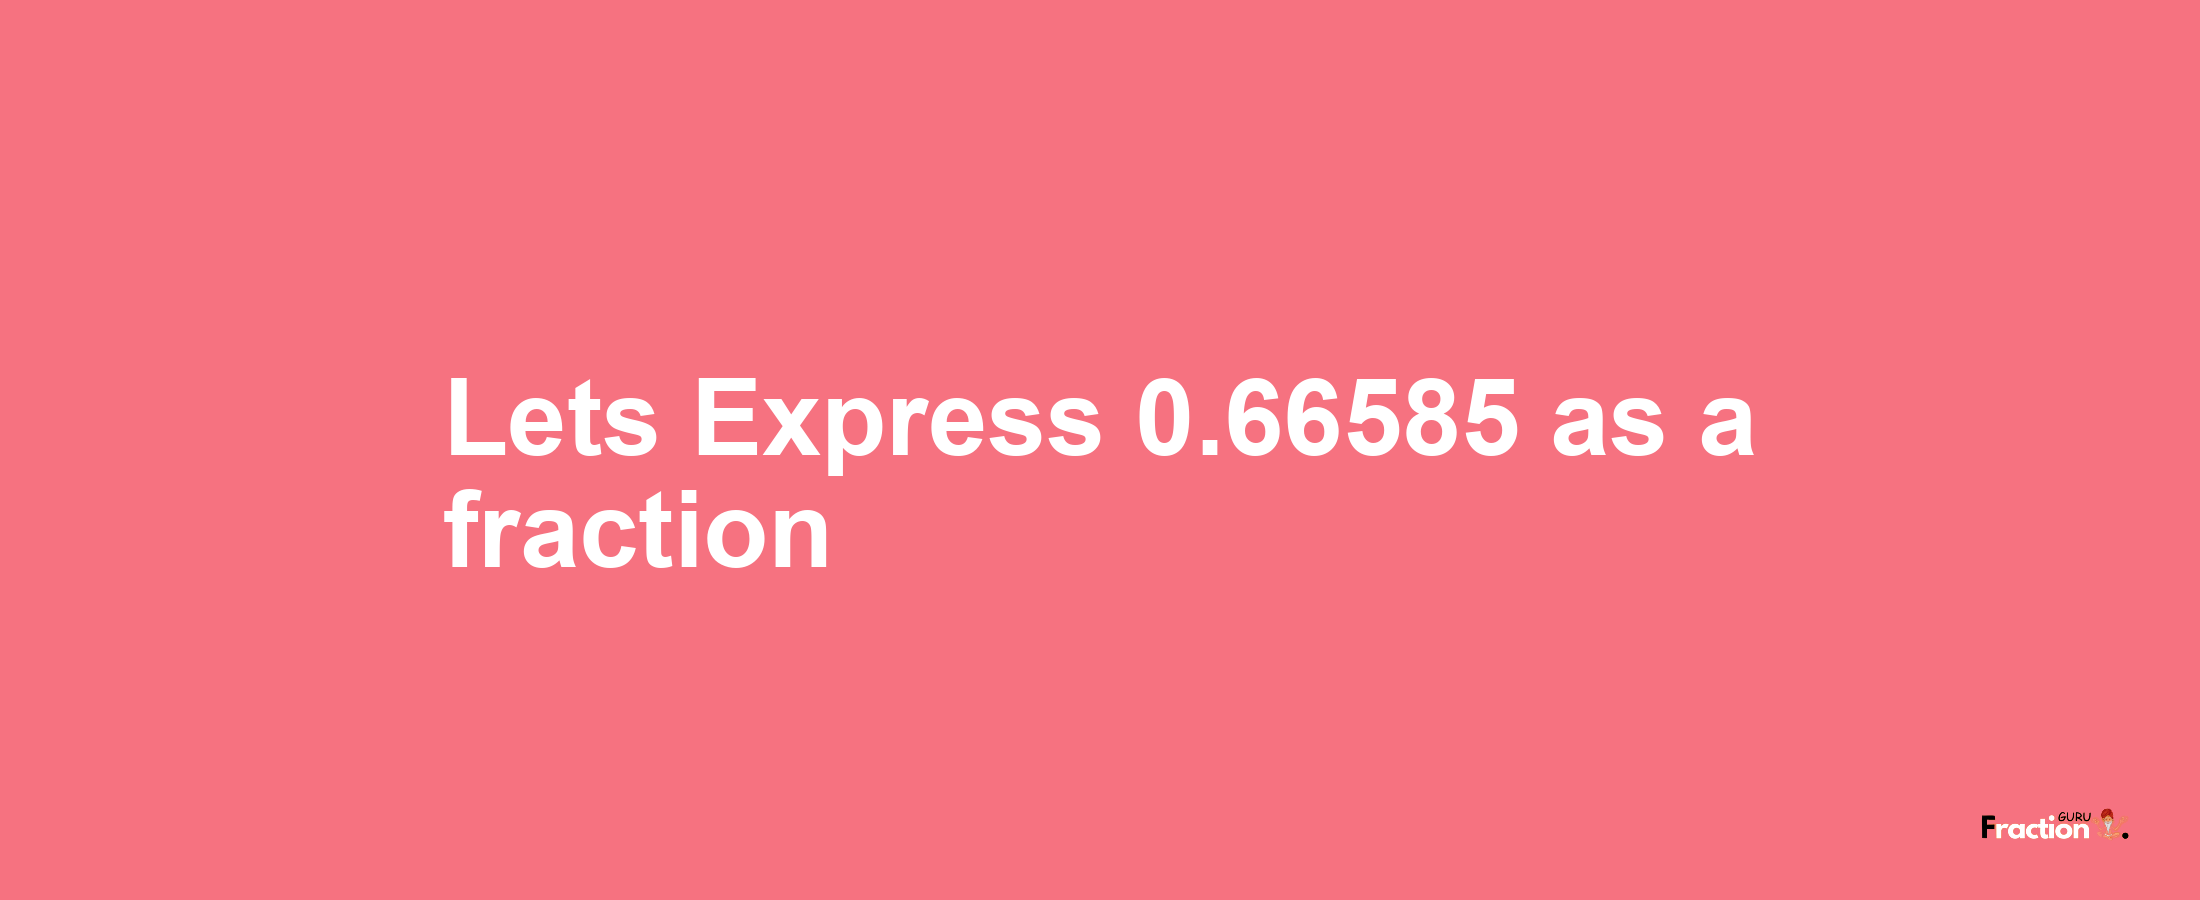 Lets Express 0.66585 as afraction